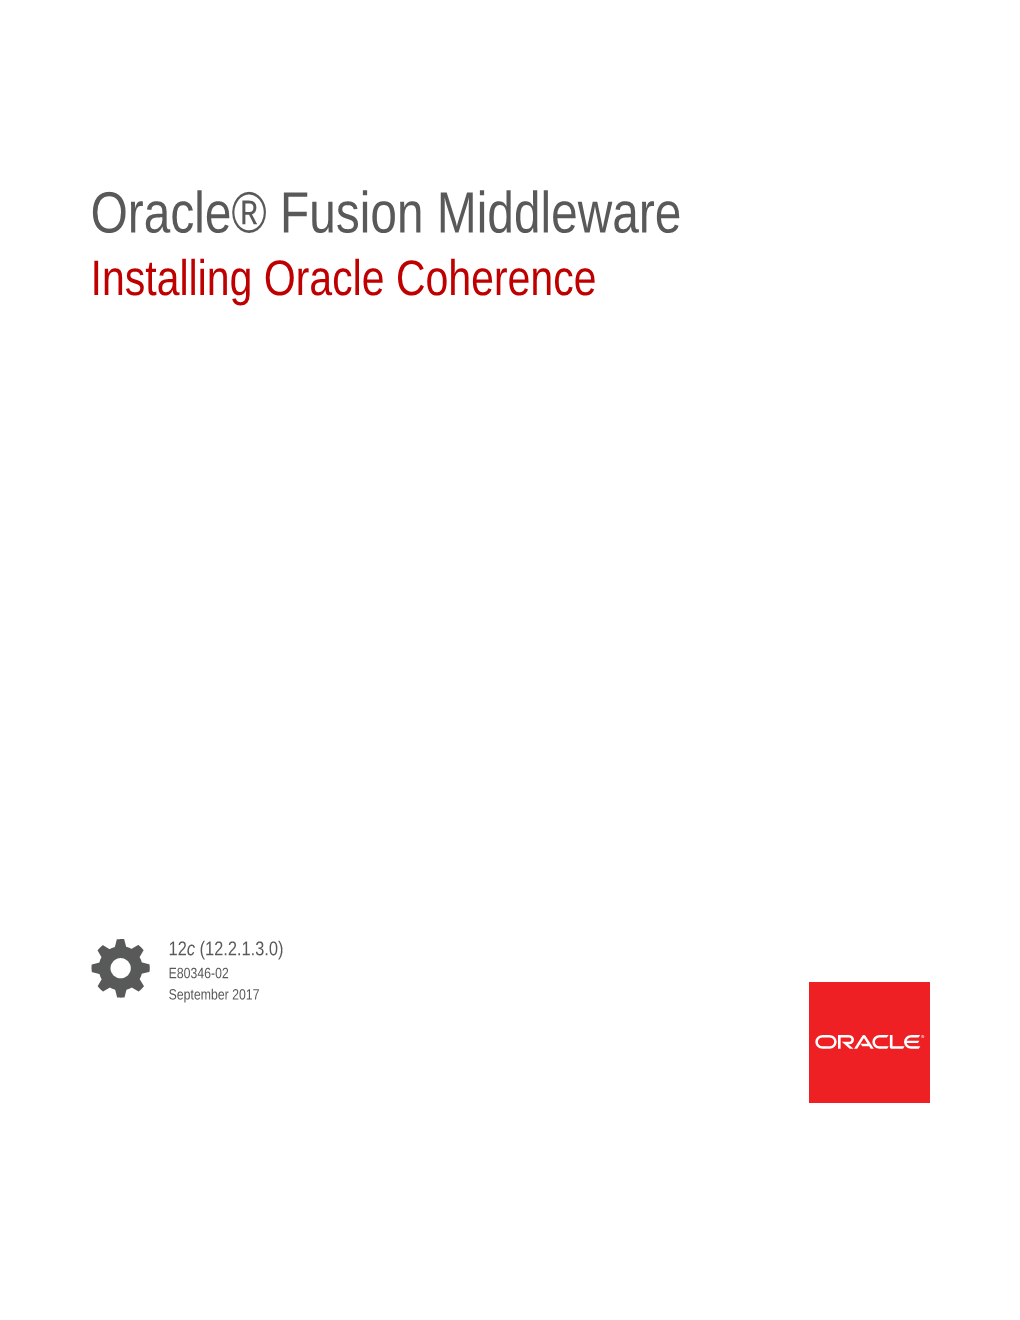 Installing Oracle Coherence